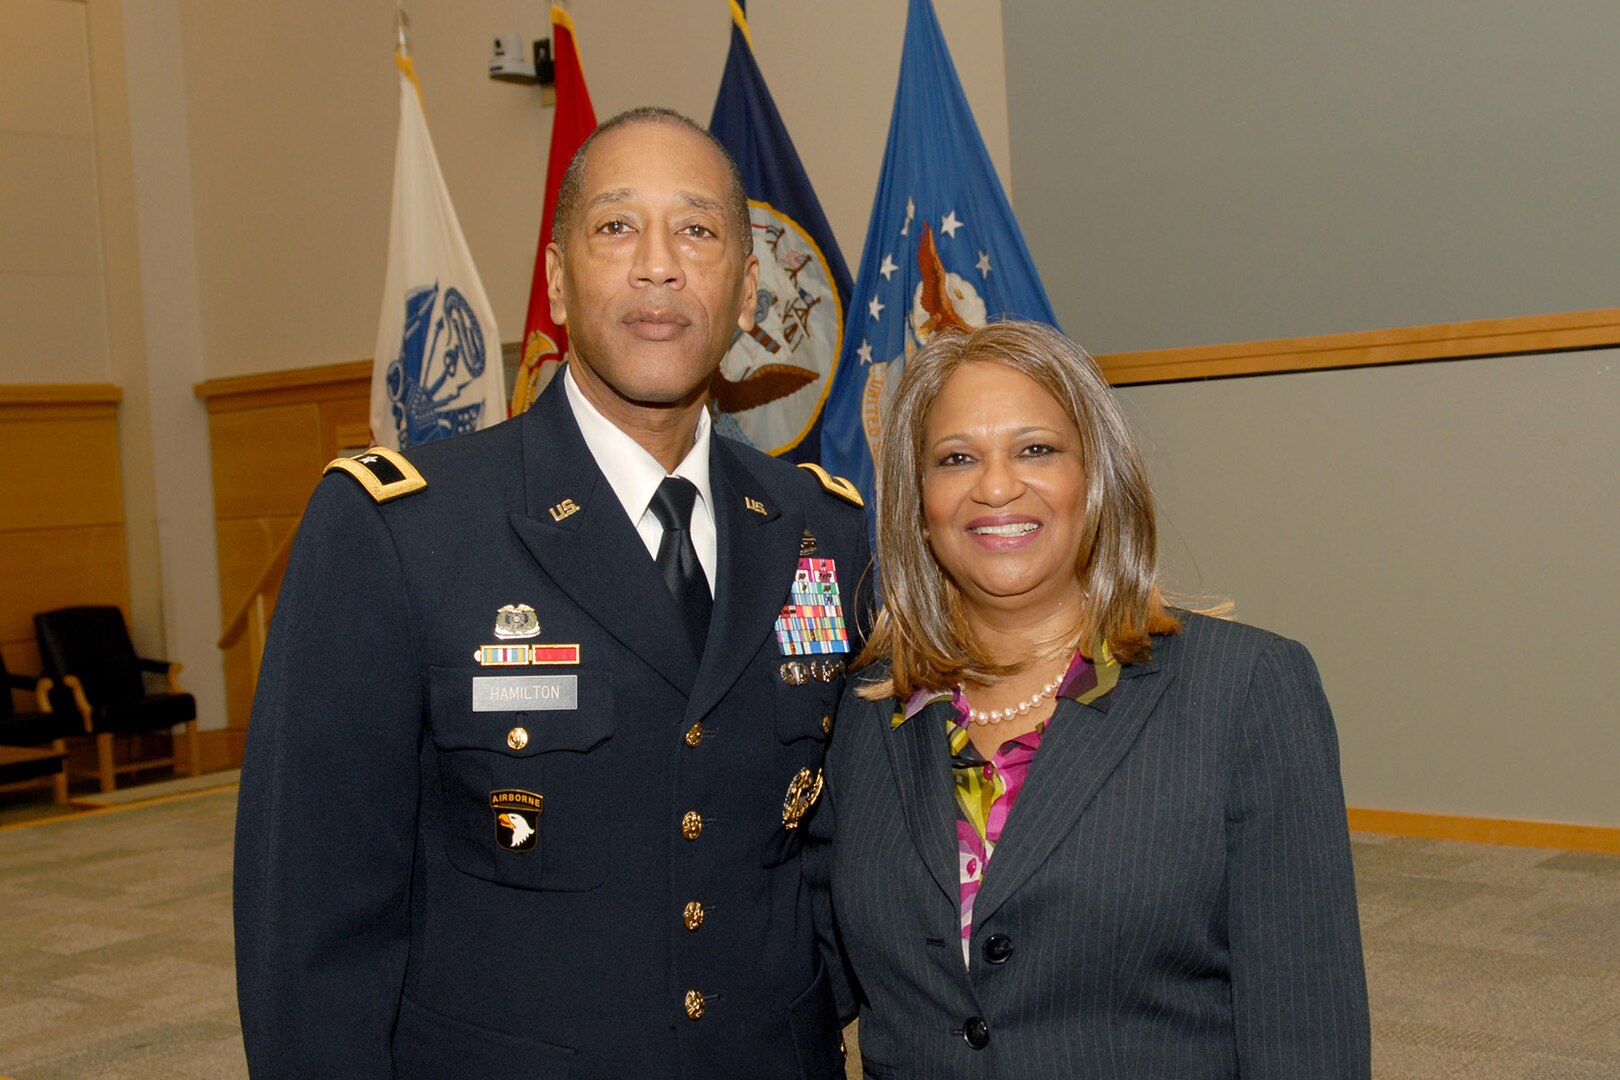 Army Brig. Gen. Charles Hamilton, DLA Troop Support commander, stands with Sheilah D. Vance, Esq., professor at Villanova University Law School, who was the guest speaker at the annual Martin Luther King, Jr. Day observance program Jan. 26.